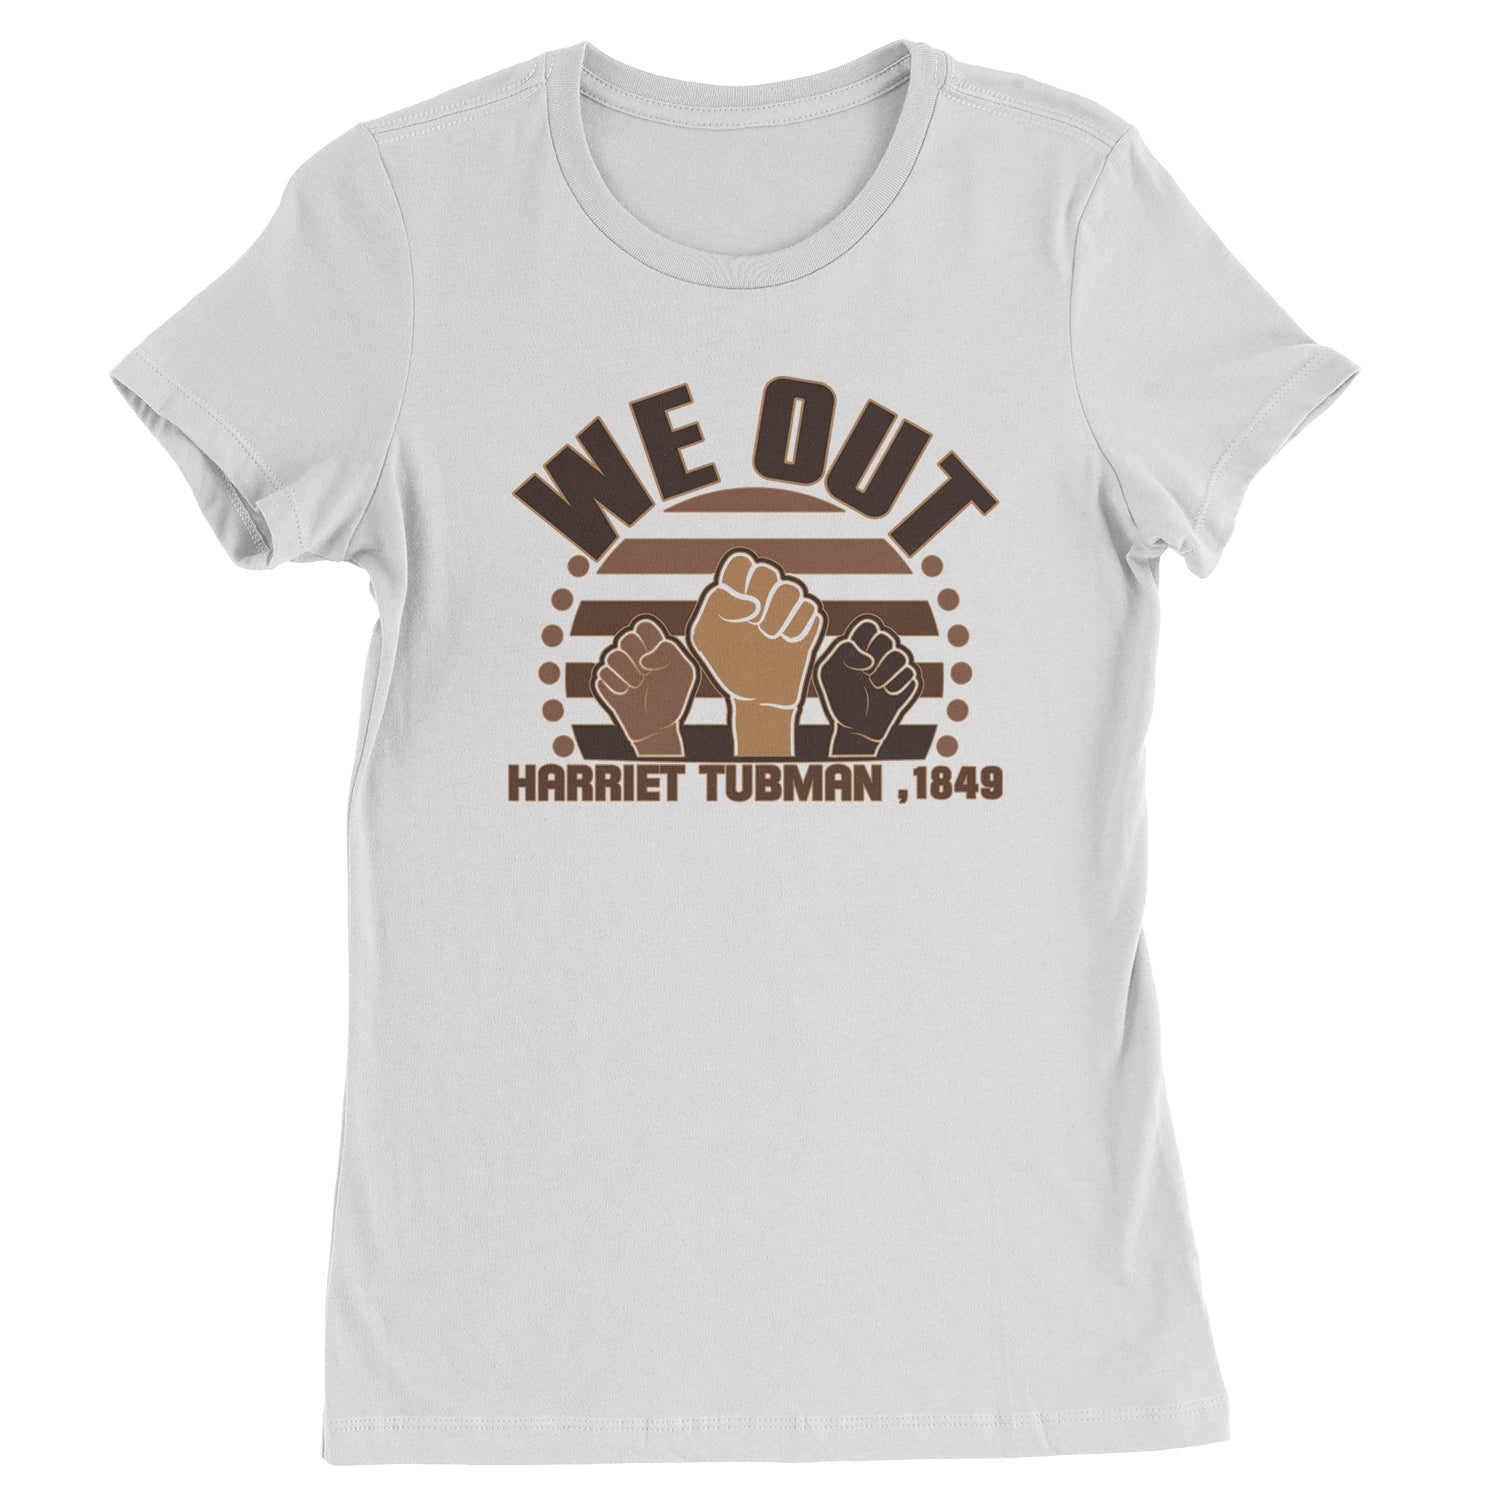 We Out Harriet Tubman Raised Fists BLM Womens T-shirt african, american, black, blm, harriet, harriett, lives, matter, out, shirt, tubman, we by Expression Tees